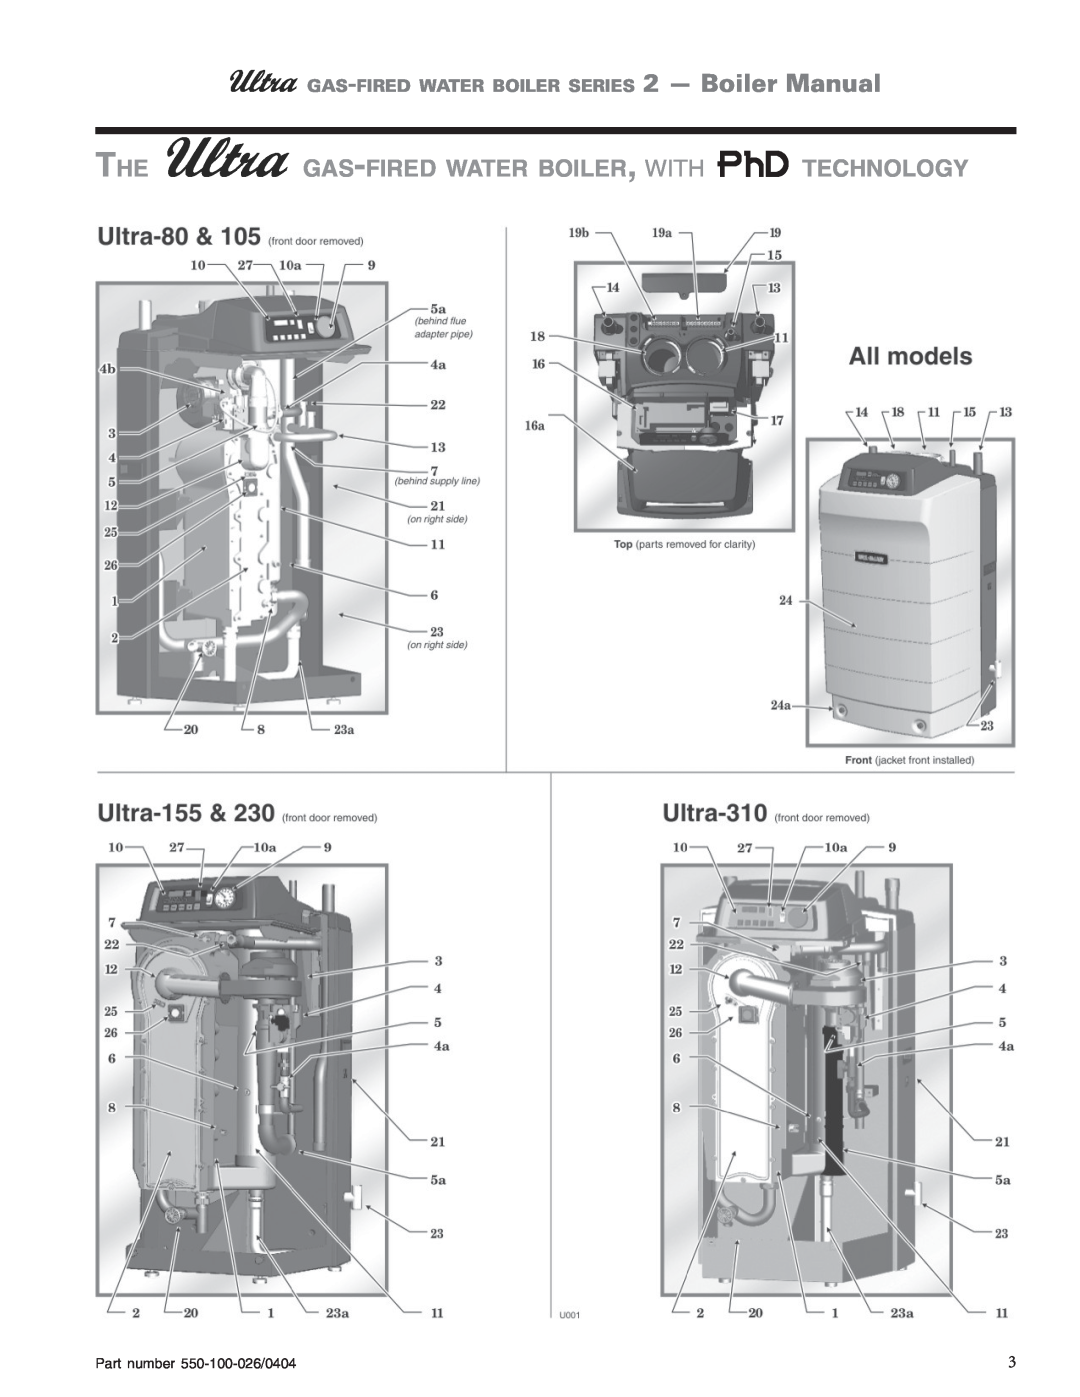 Ultra electronic 155, 105 THE GAS-FIREDWATER BOILER, WITH PhD TECHNOLOGY, GAS-FIREDWATER BOILER SERIES 2 - Boiler Manual 